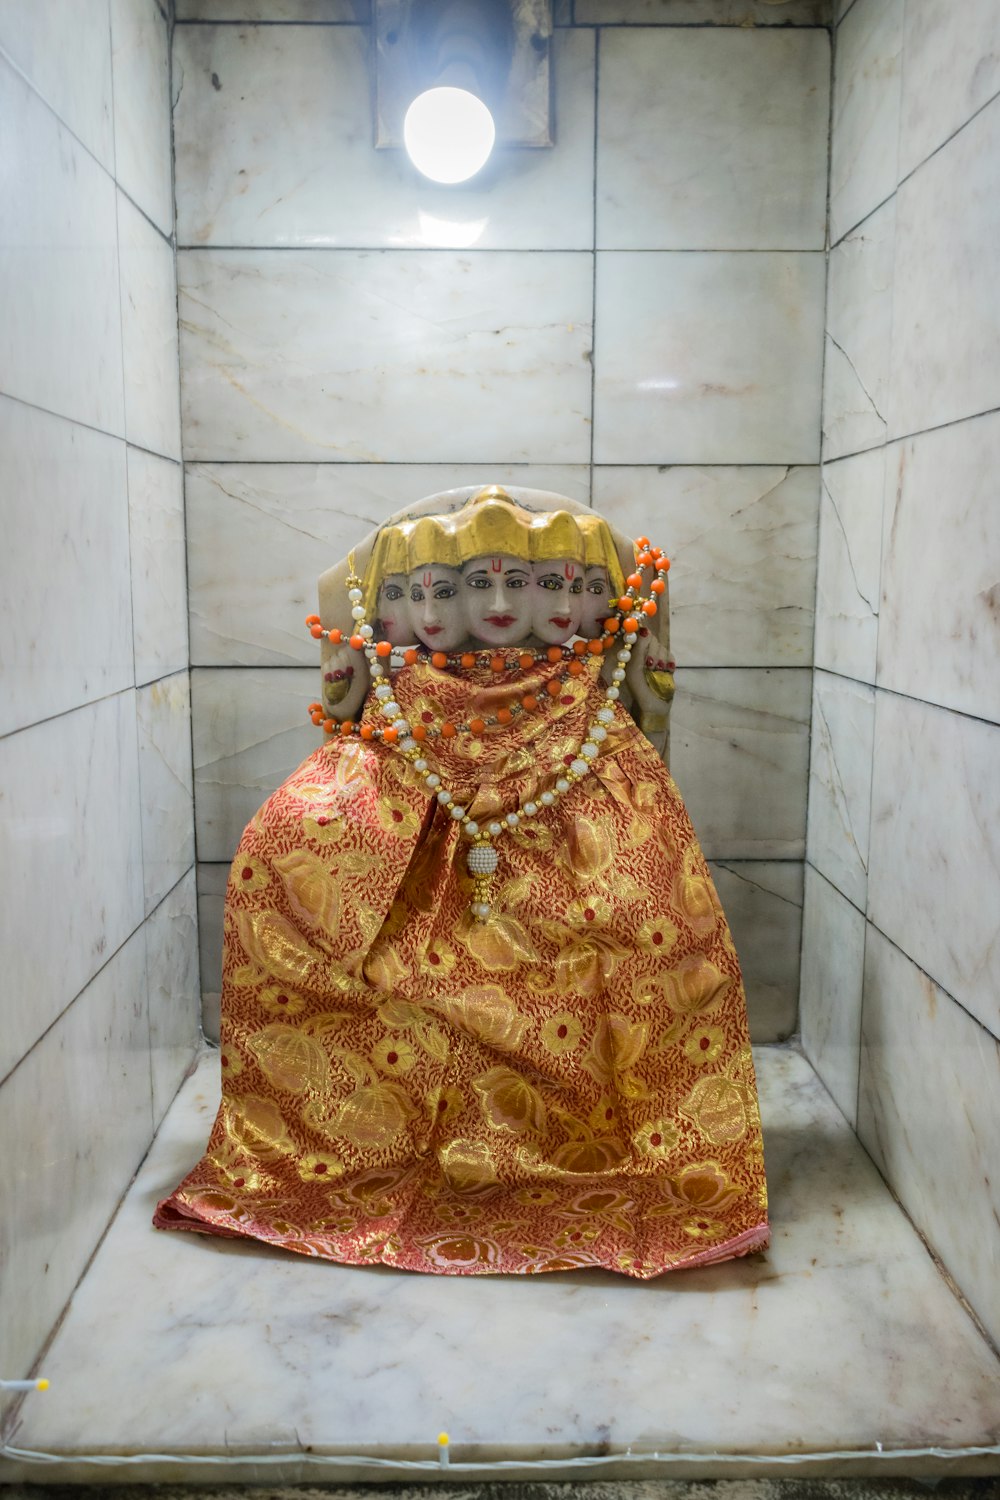 a statue of a woman in a gold and orange outfit